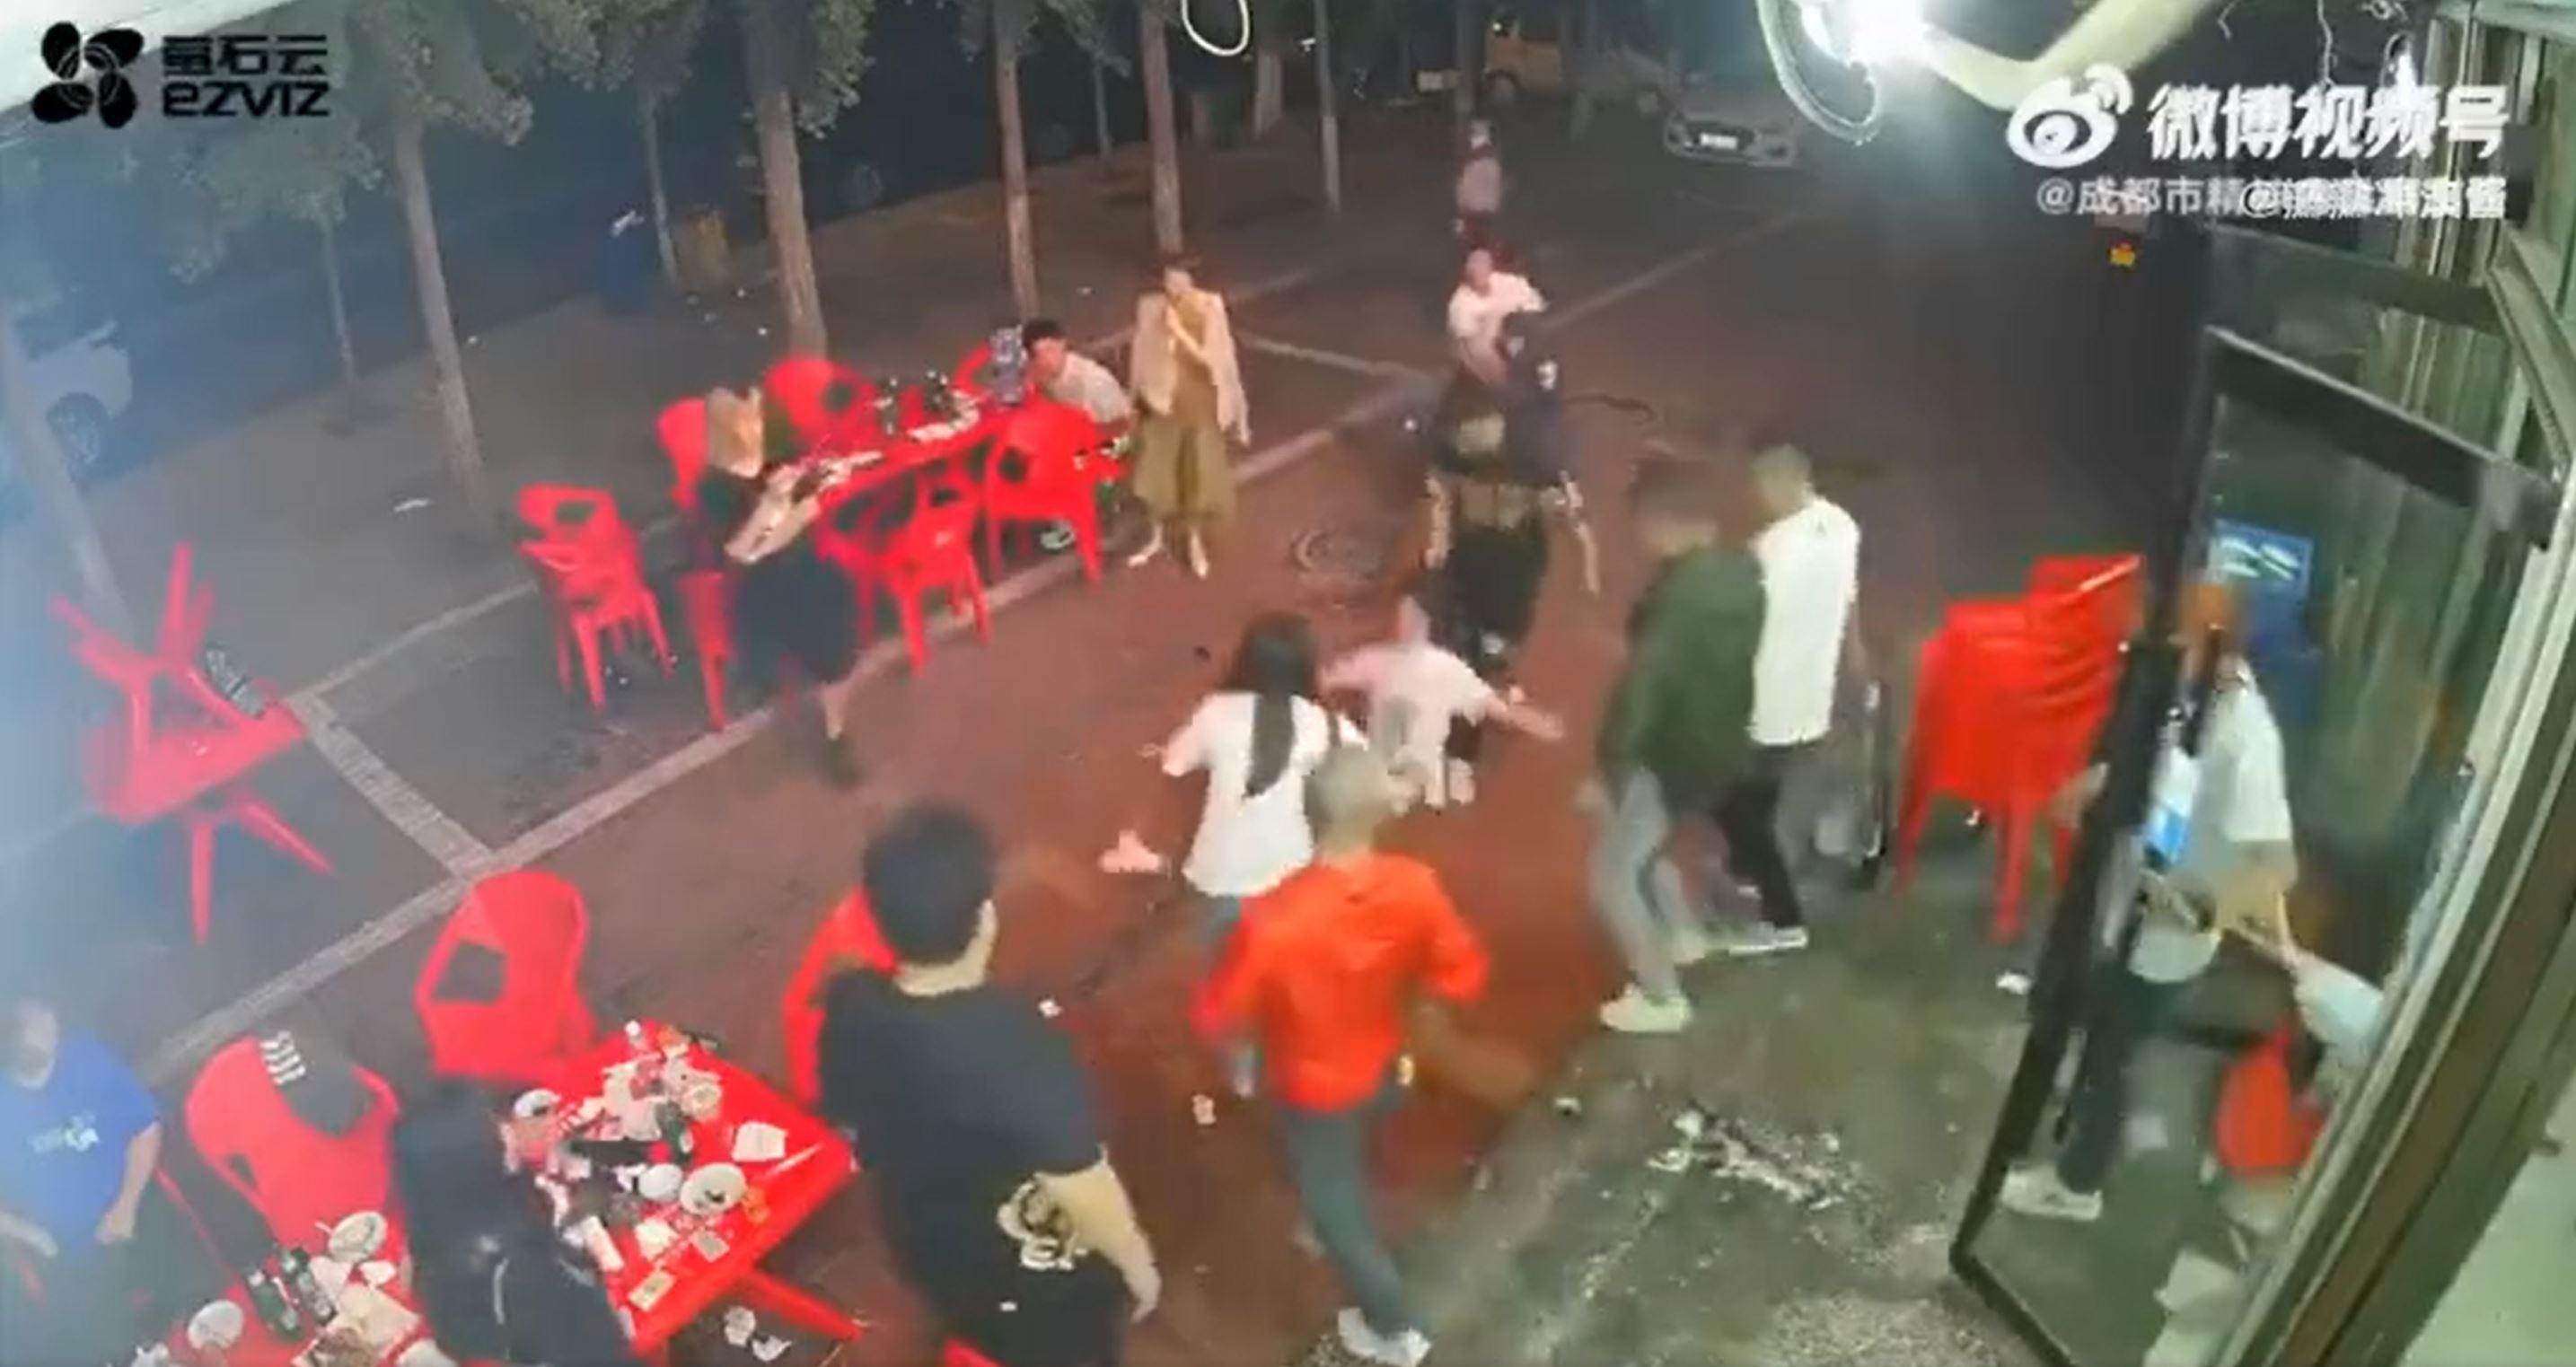 A screenshot from a video clip showing the violent assault on women diners at a restaurant in Tangshan, China, on June 10.